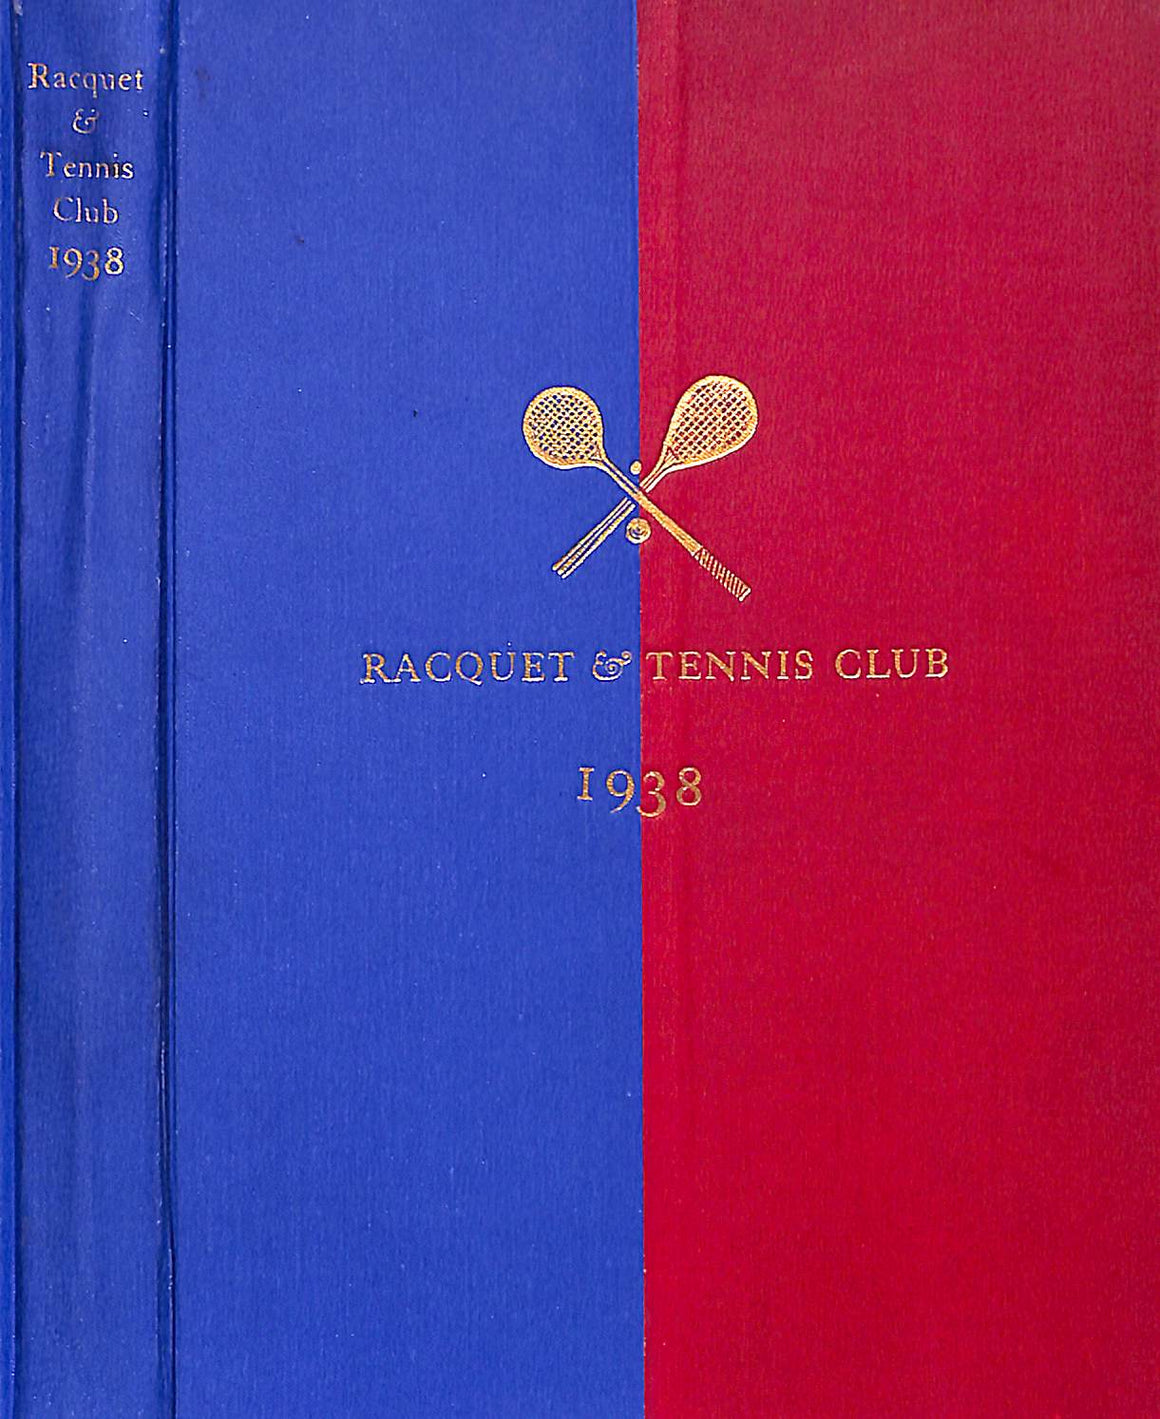 "Club Book For 1938 Racquet And Tennis Club"